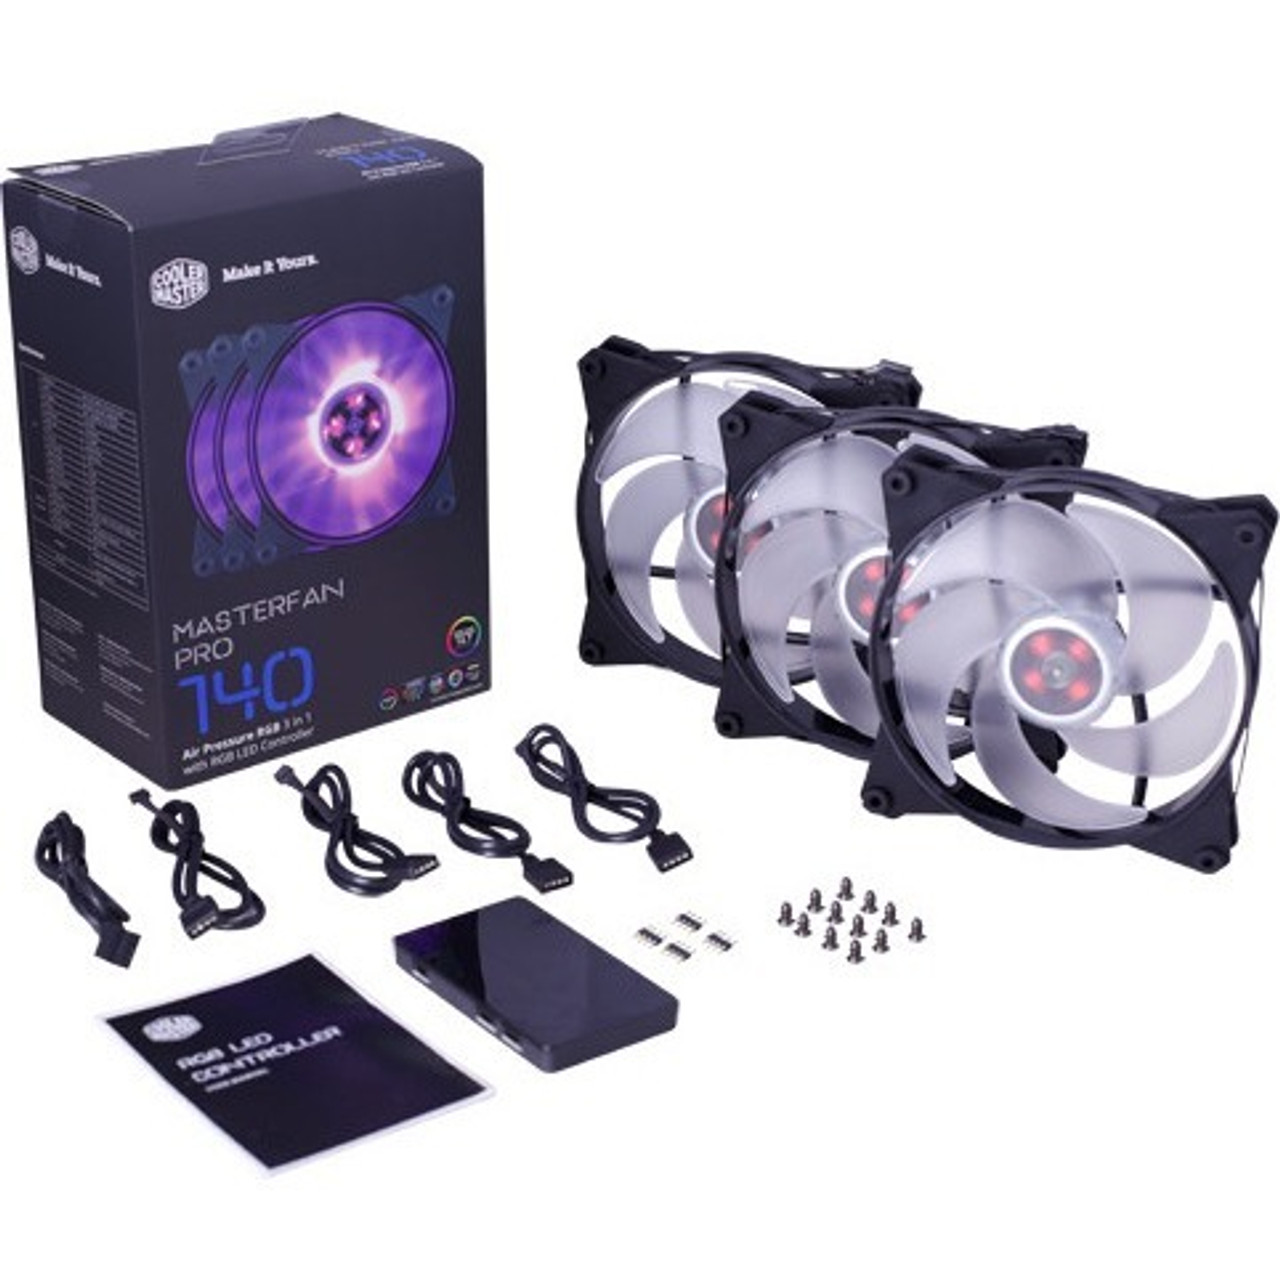 MFY-P4DC-153PC-R1 Cooler Master MasterFan Pro 140 Air Pressure RGB 3 in 1 with RGB LED Controller 1 x 140 mm 1550 rpm46.2 CFM 20 dB(A) Noise 4-pin RGB LED Rubber 55.9